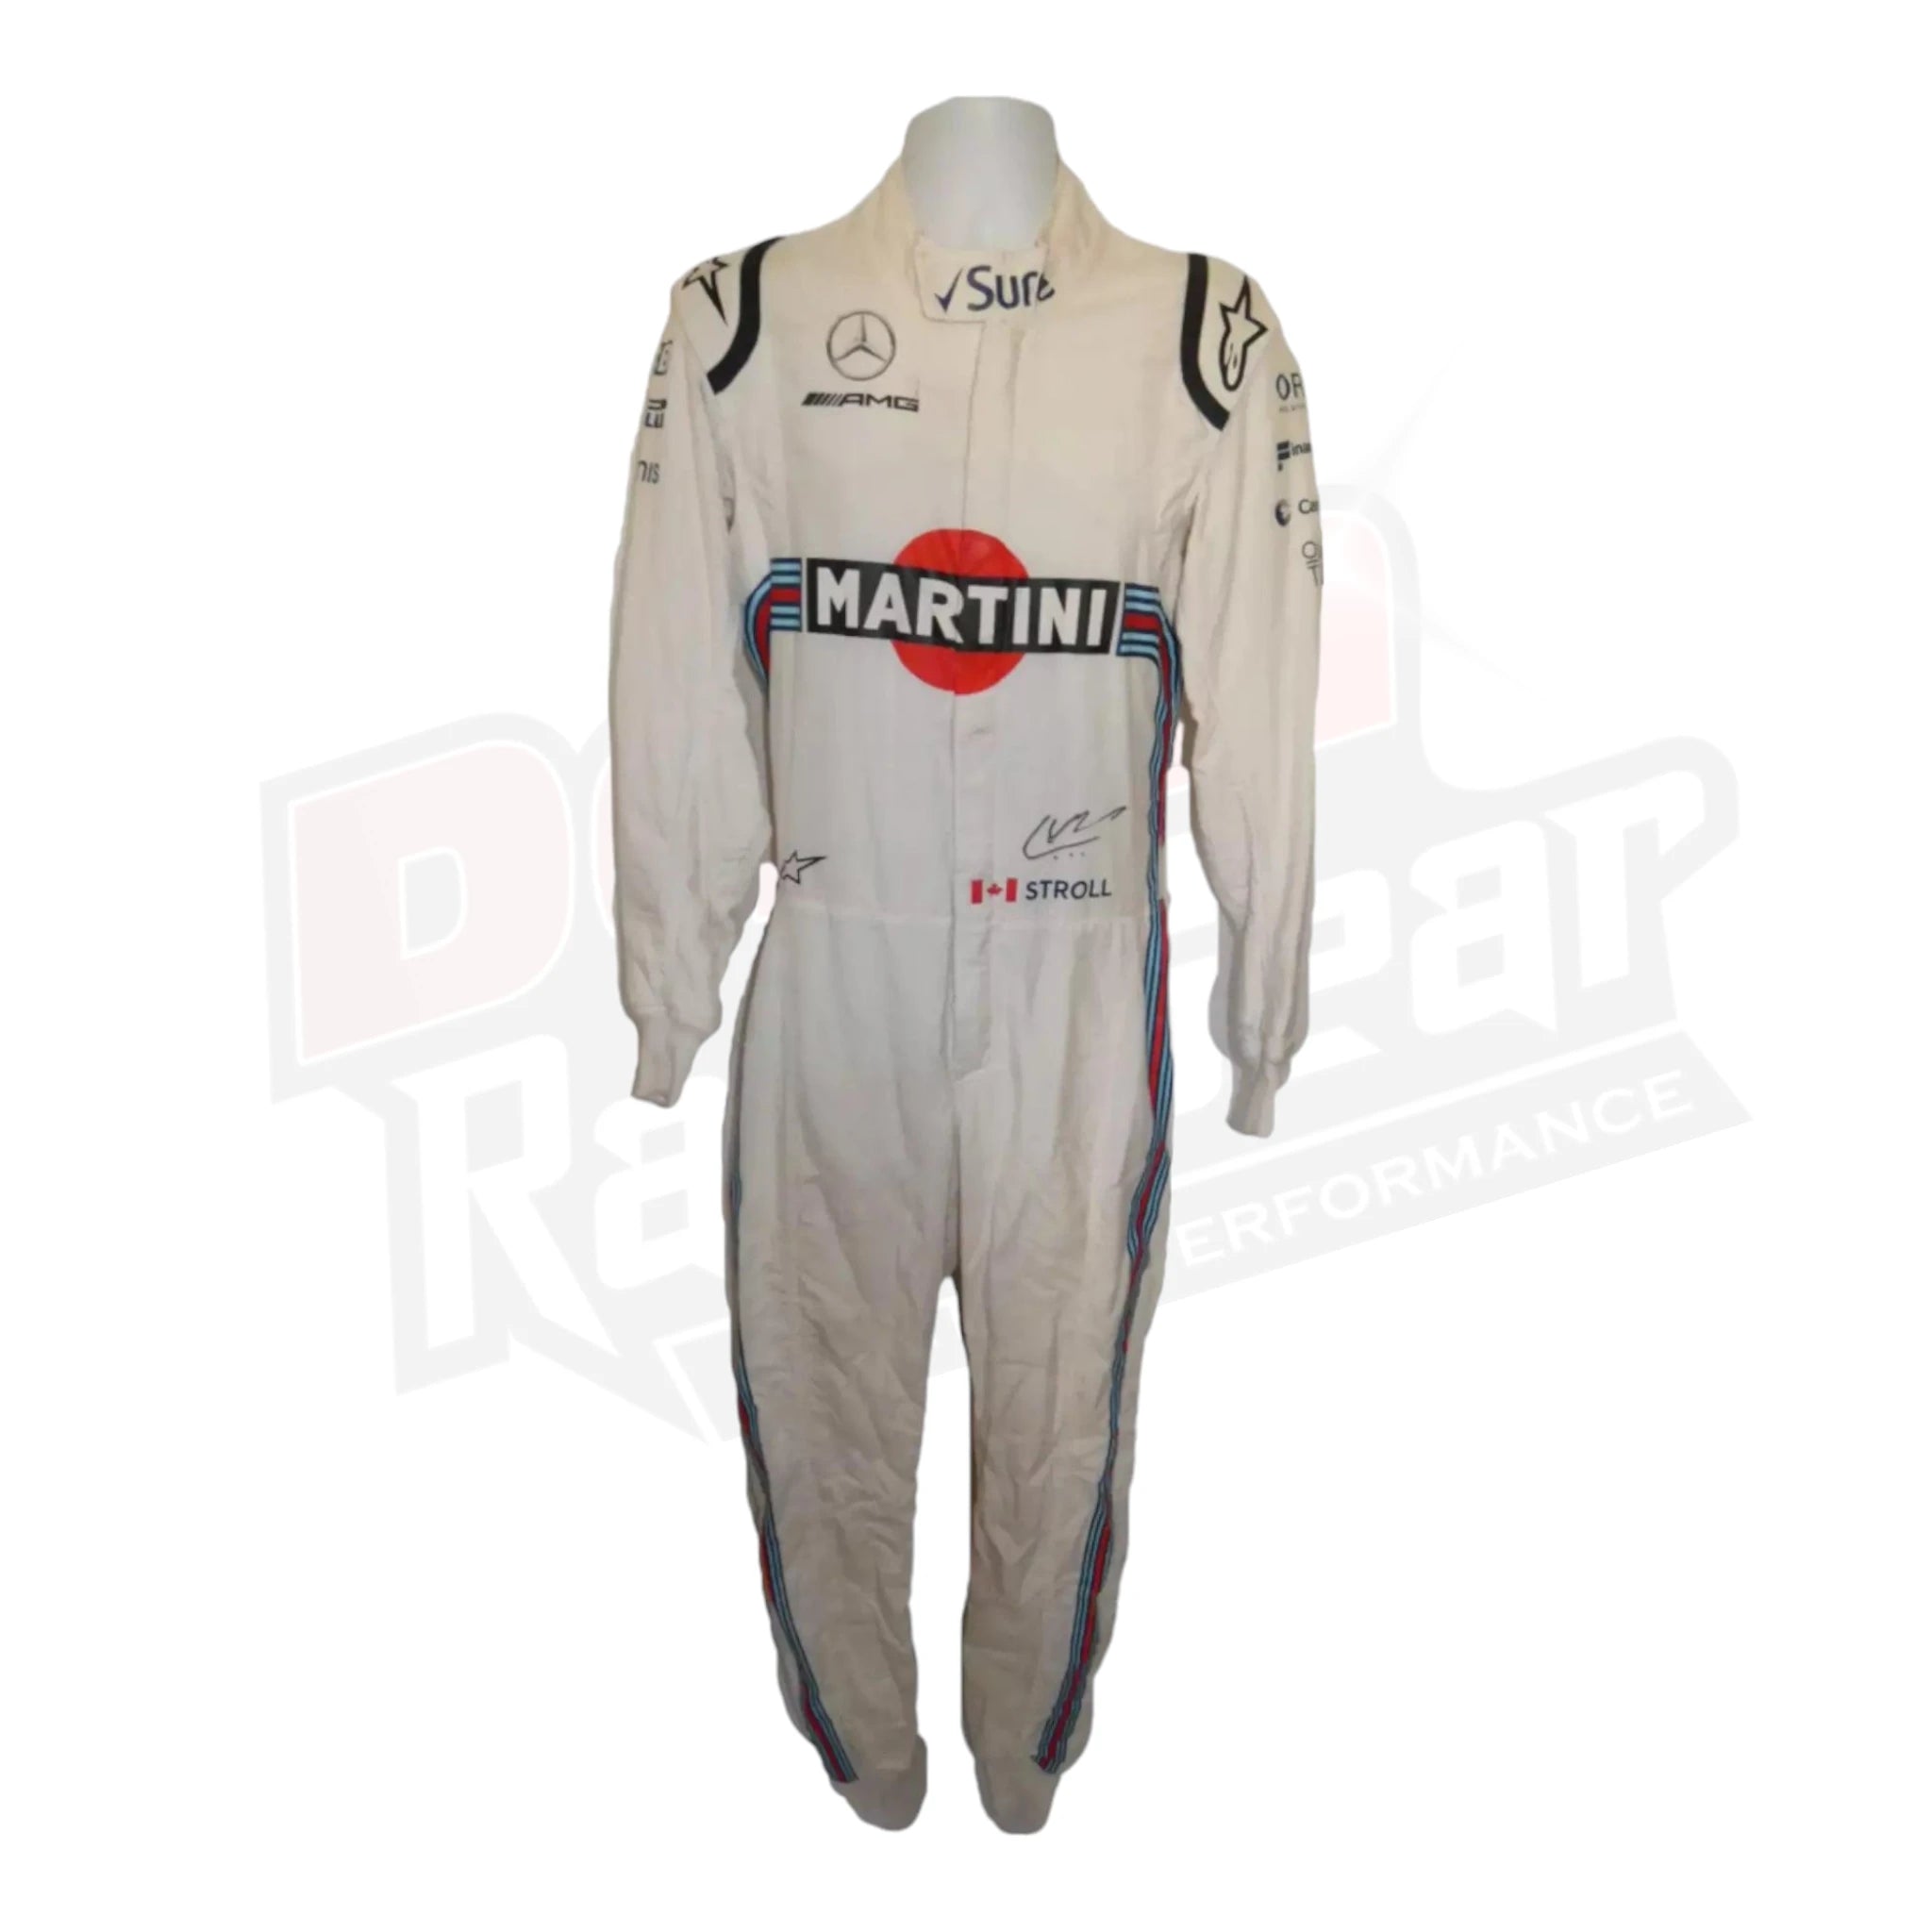 Lance Stroll Signed 2018 Williams Martini Race suit